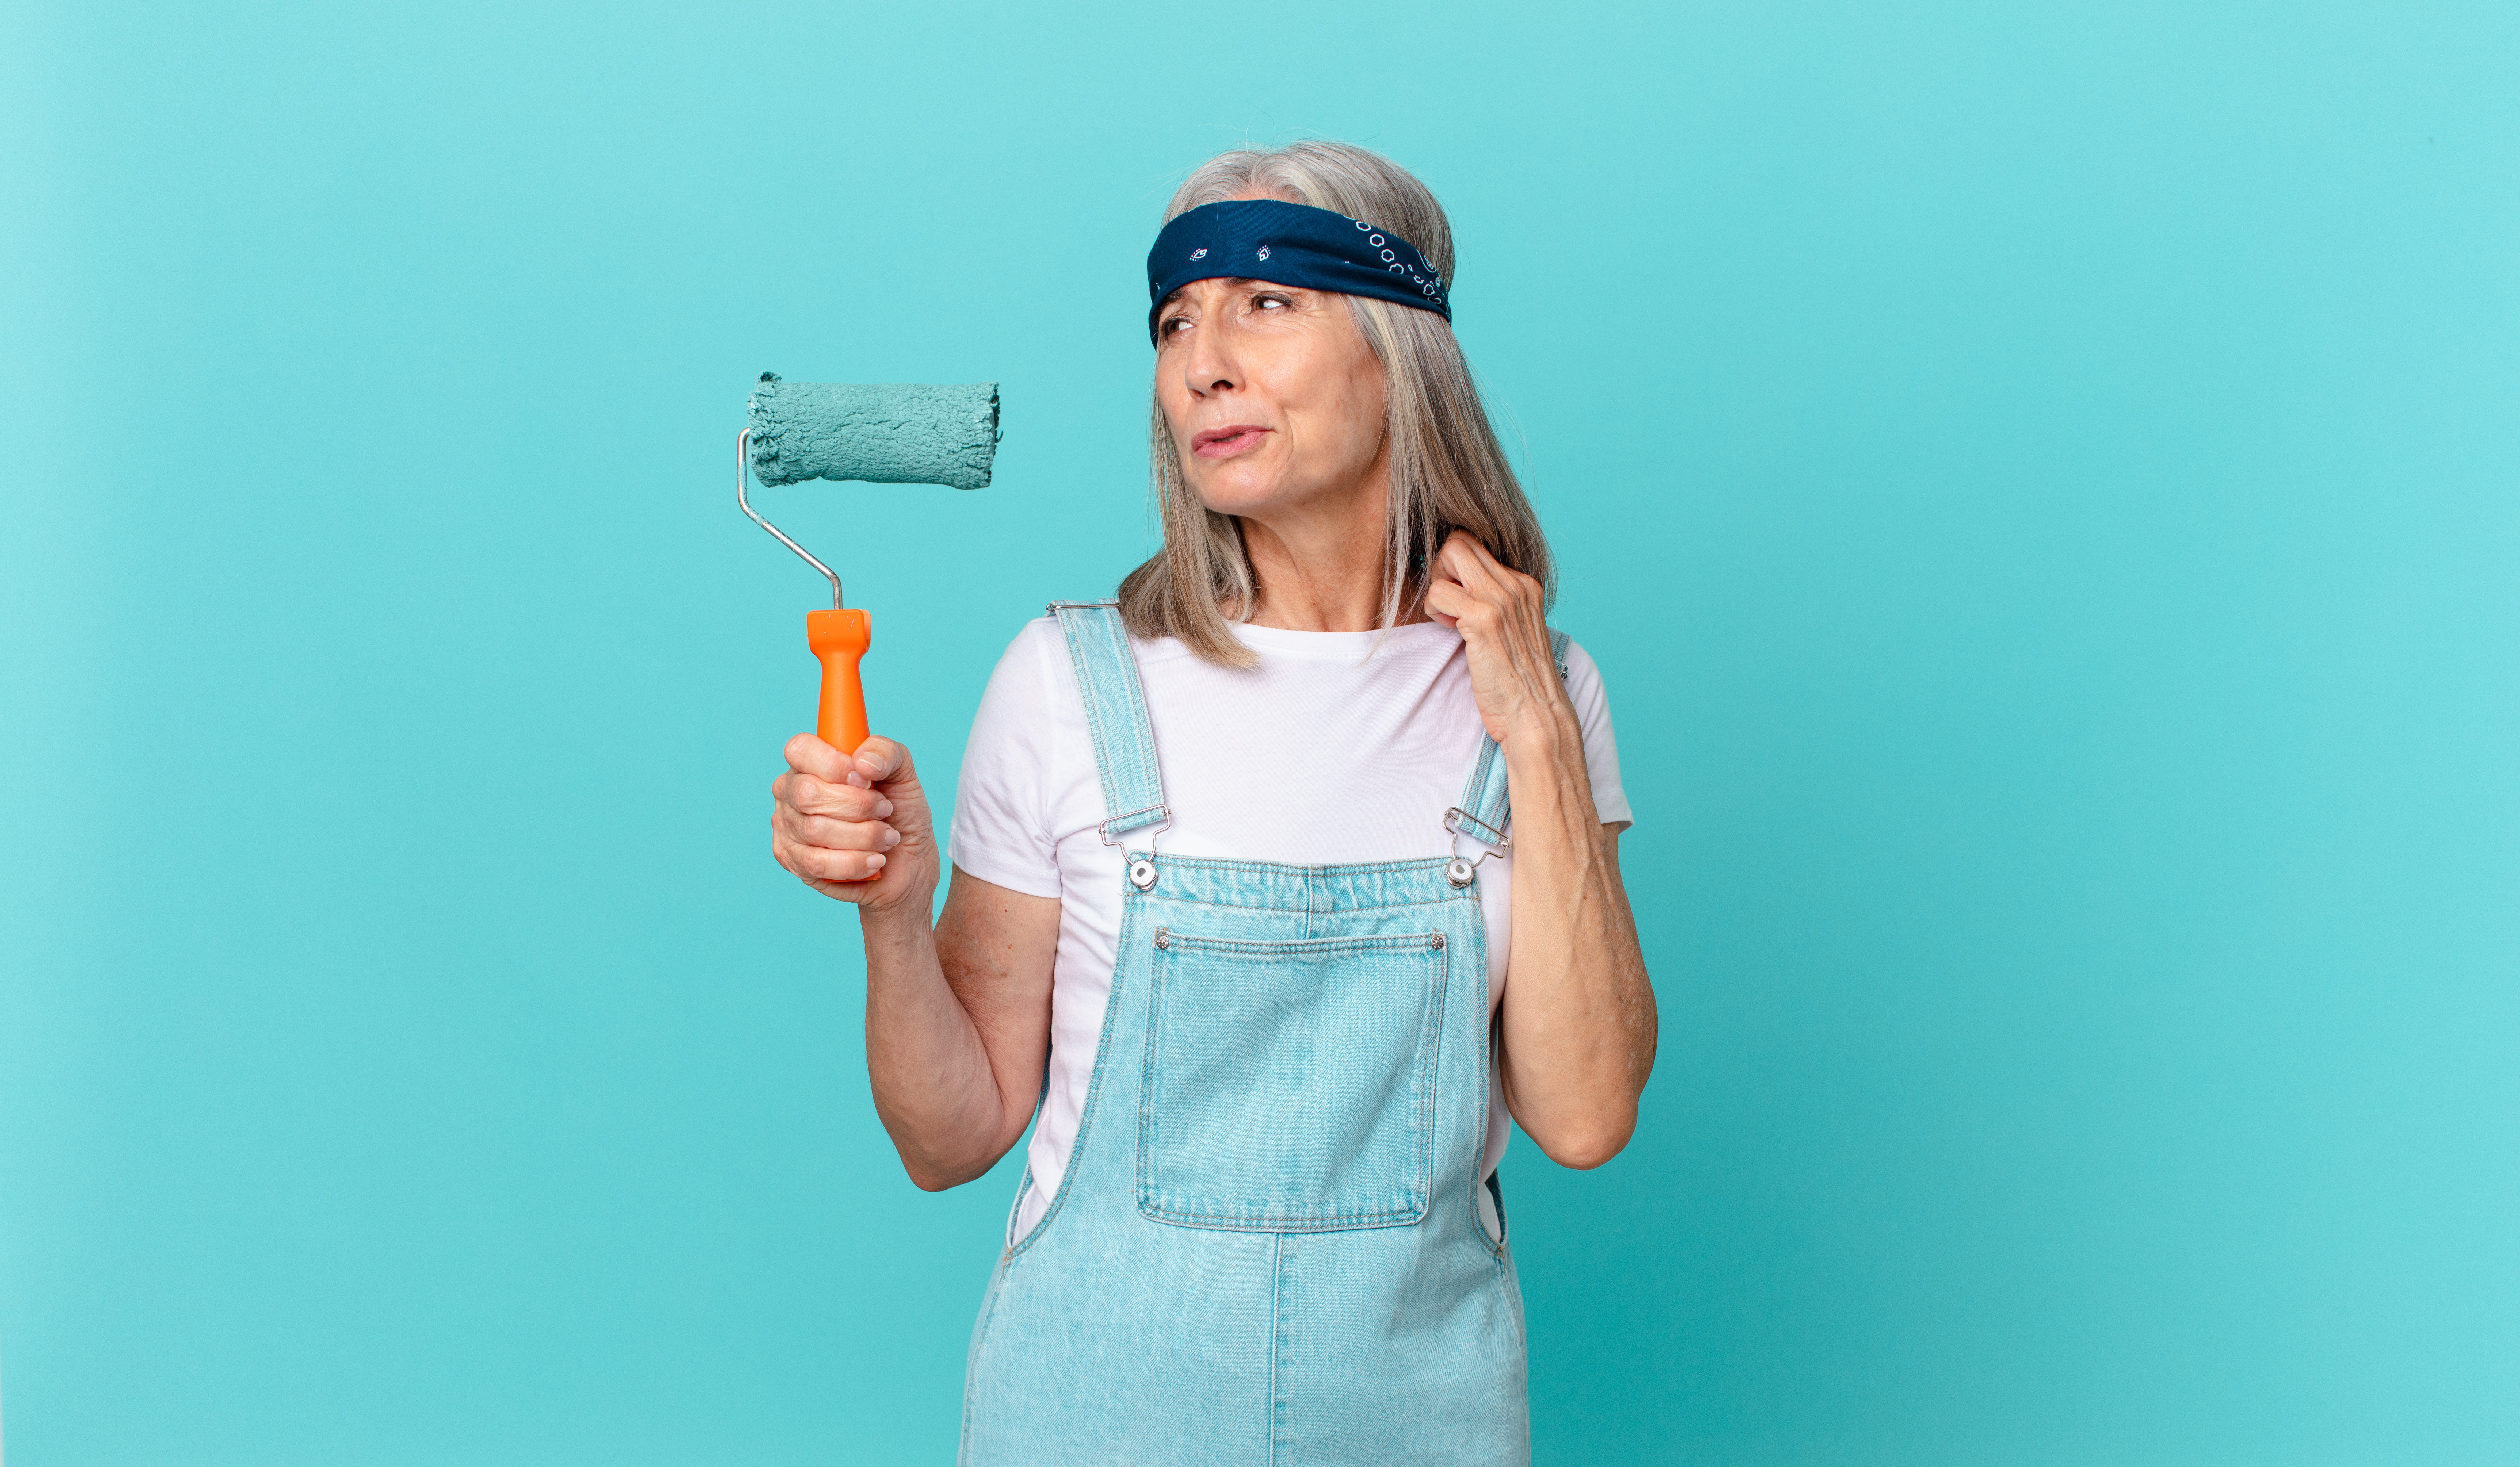 A woman holds a paint roller on a blue background.